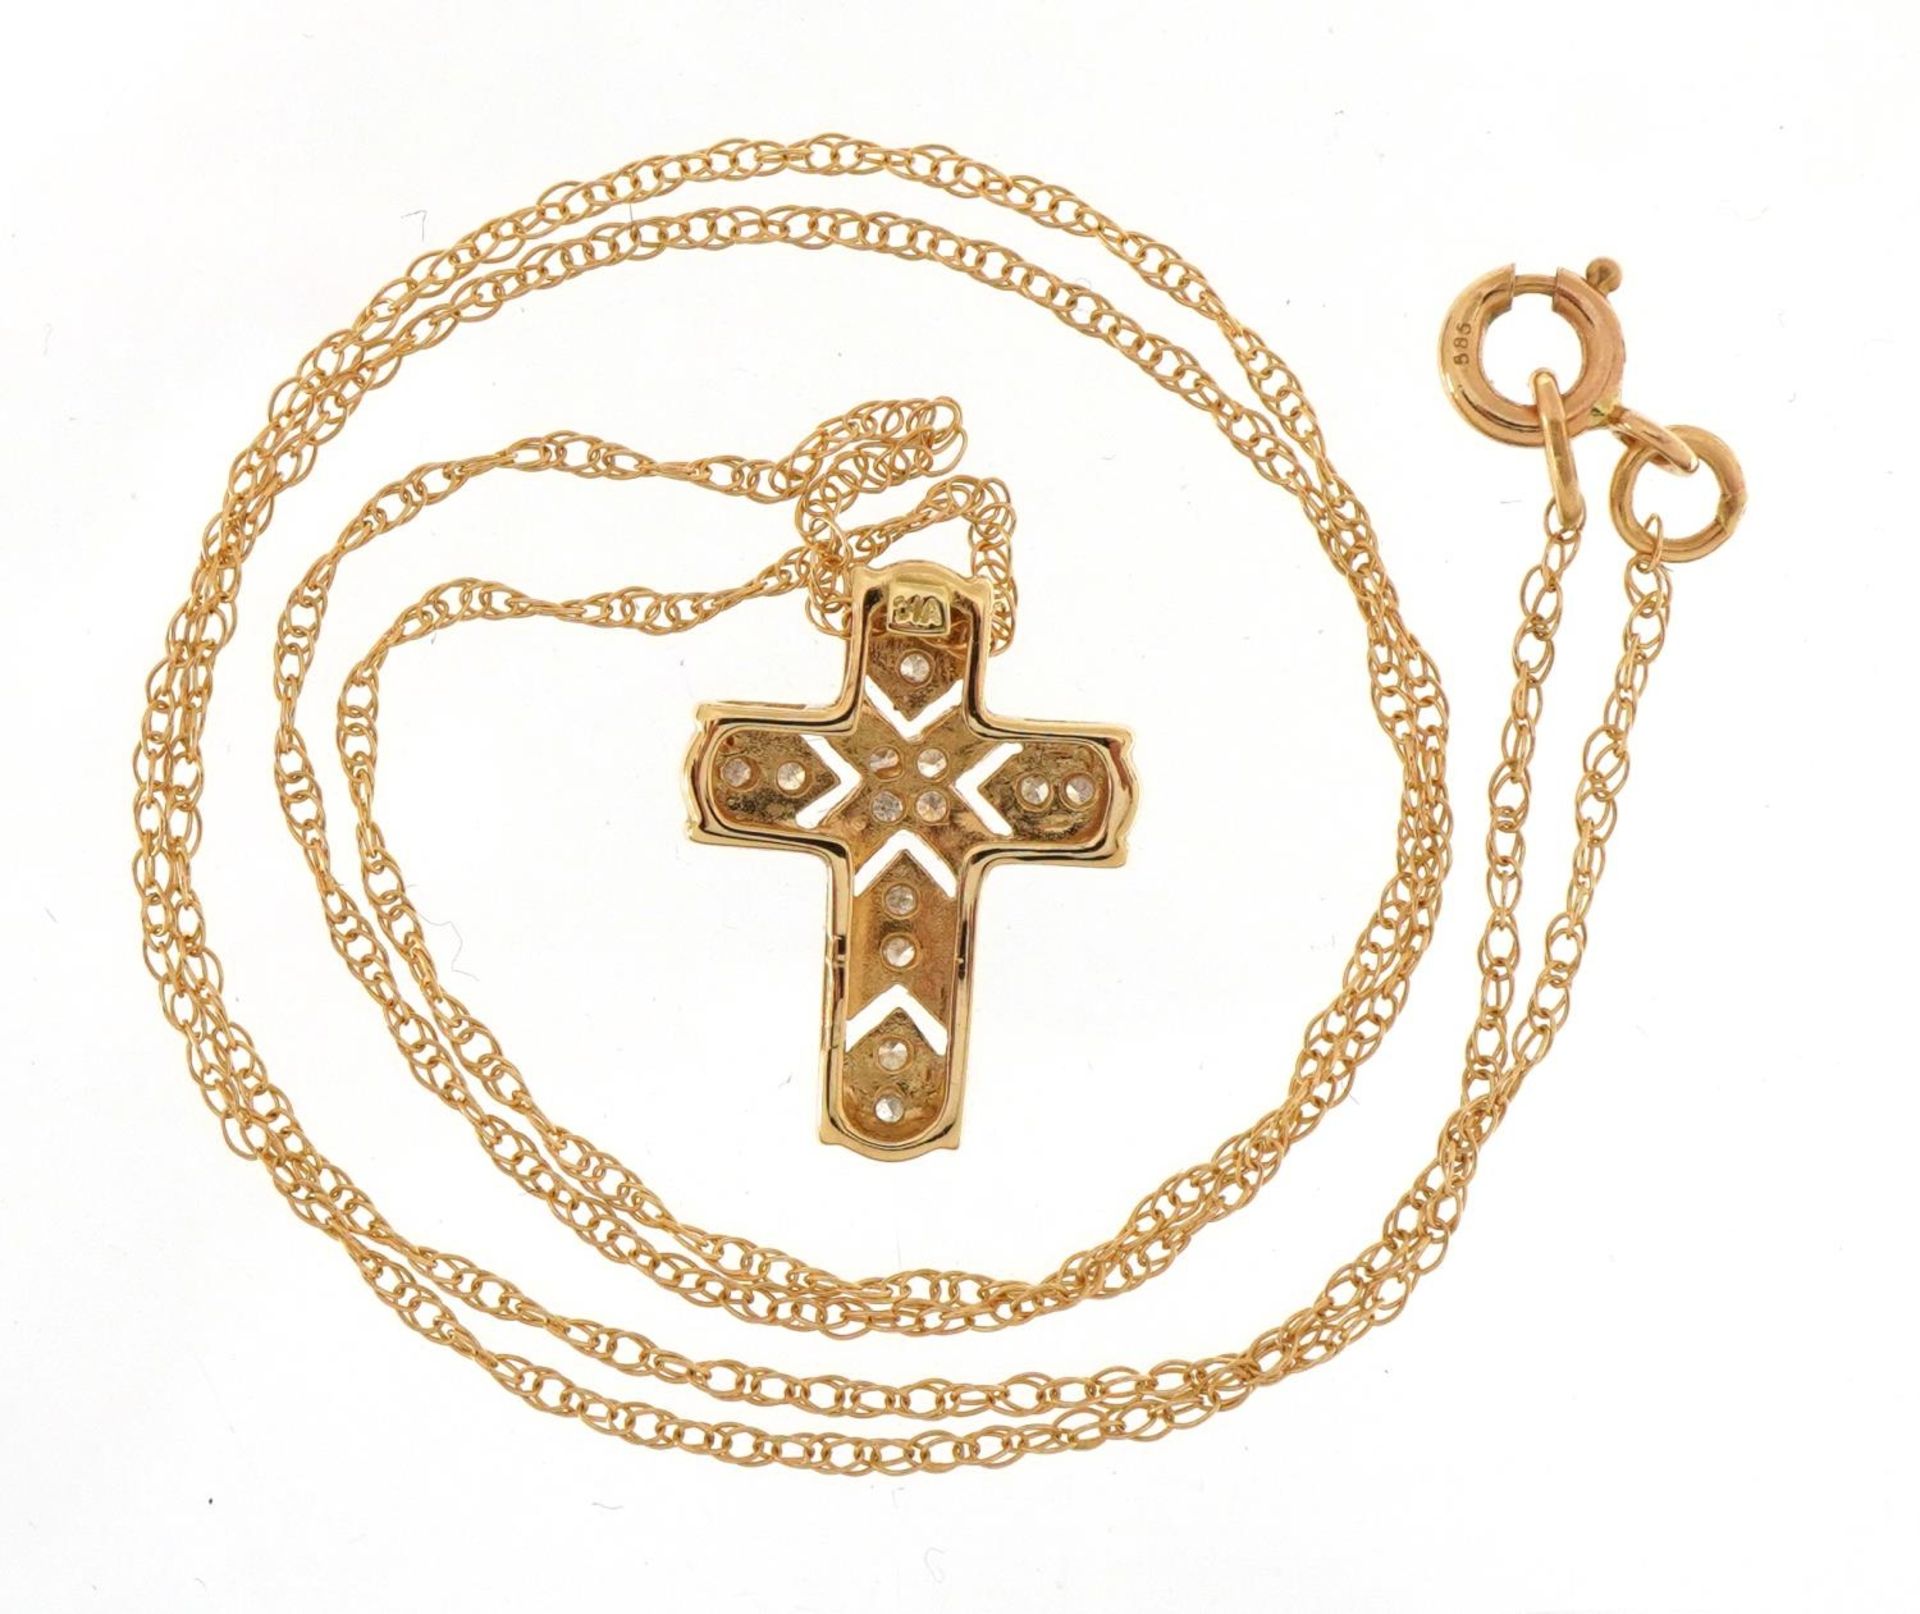 14ct gold diamond cross pendant on a 14ct gold necklace, housed in a Danbury Mint box, 1.8cm high - Image 3 of 6